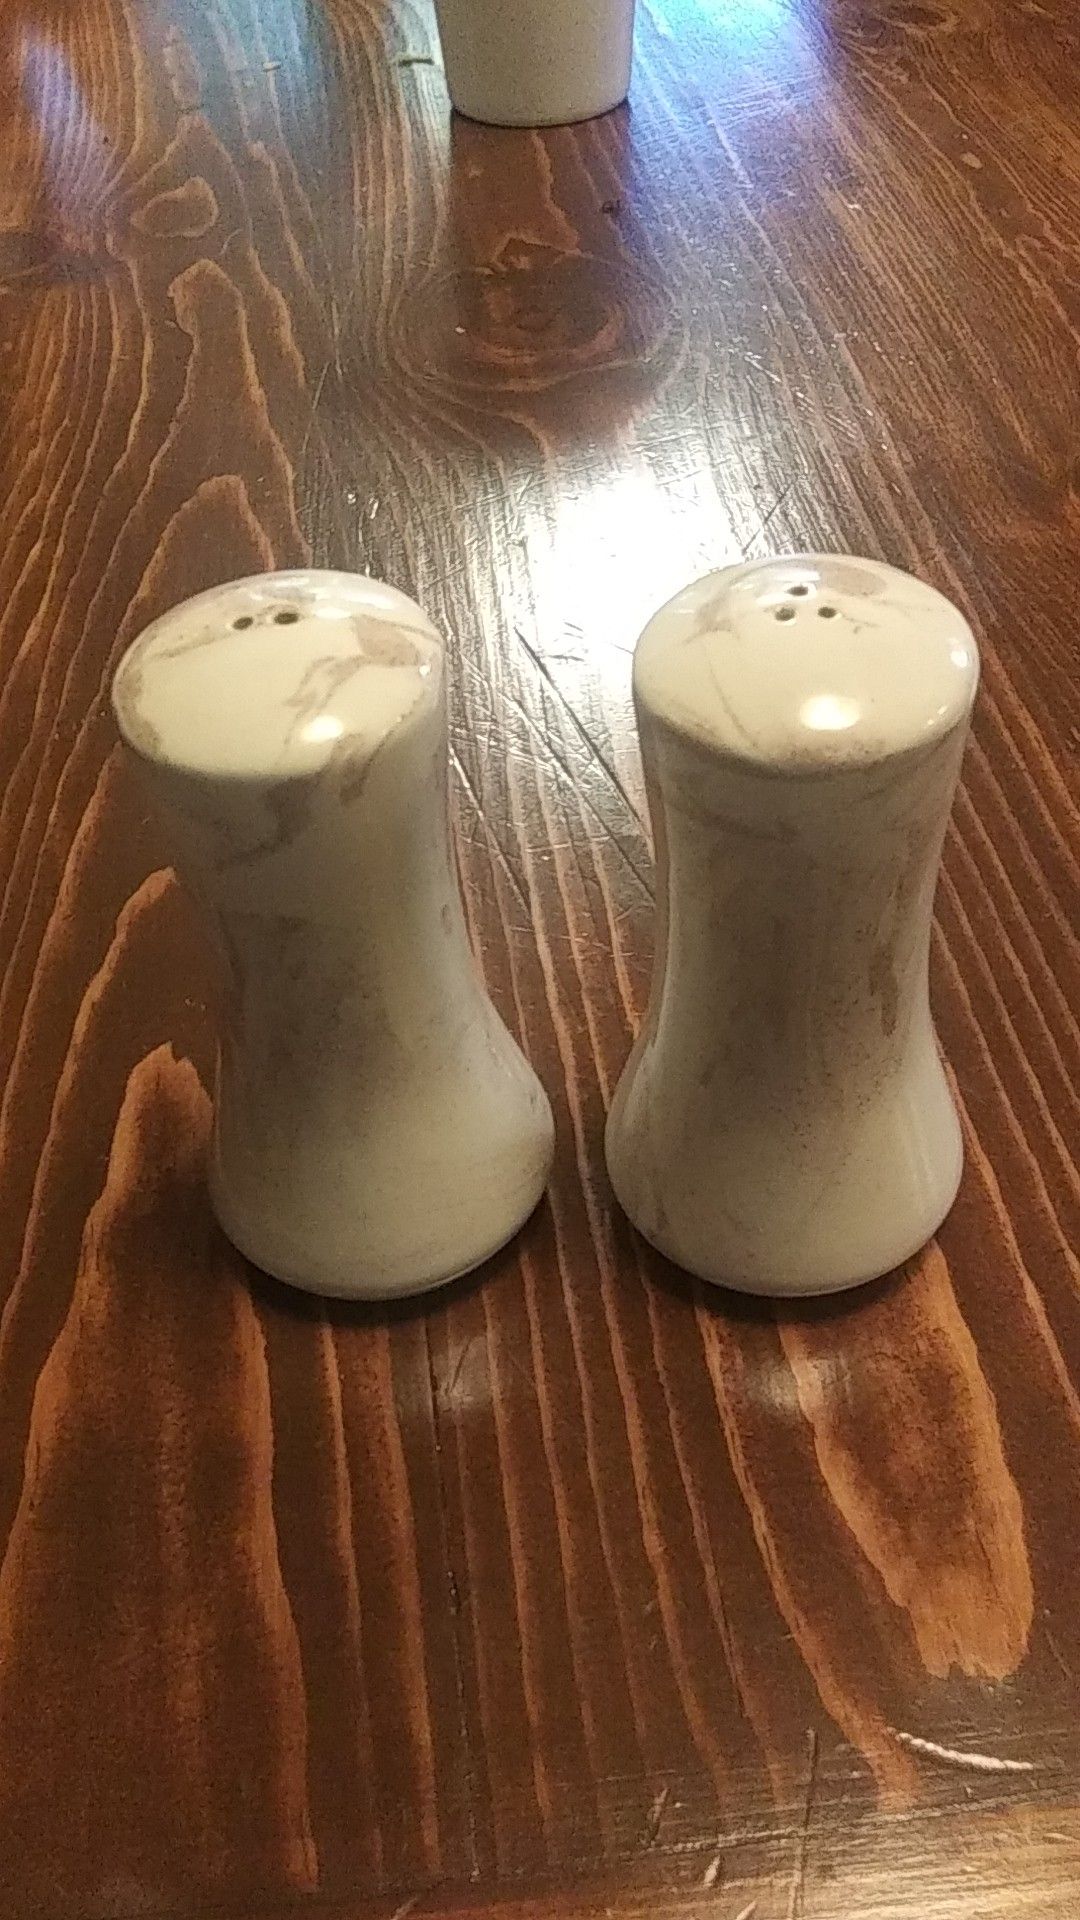 Ceramic Salt and Pepper Shaker Glazed with Ashes from Mt. Saint Helens